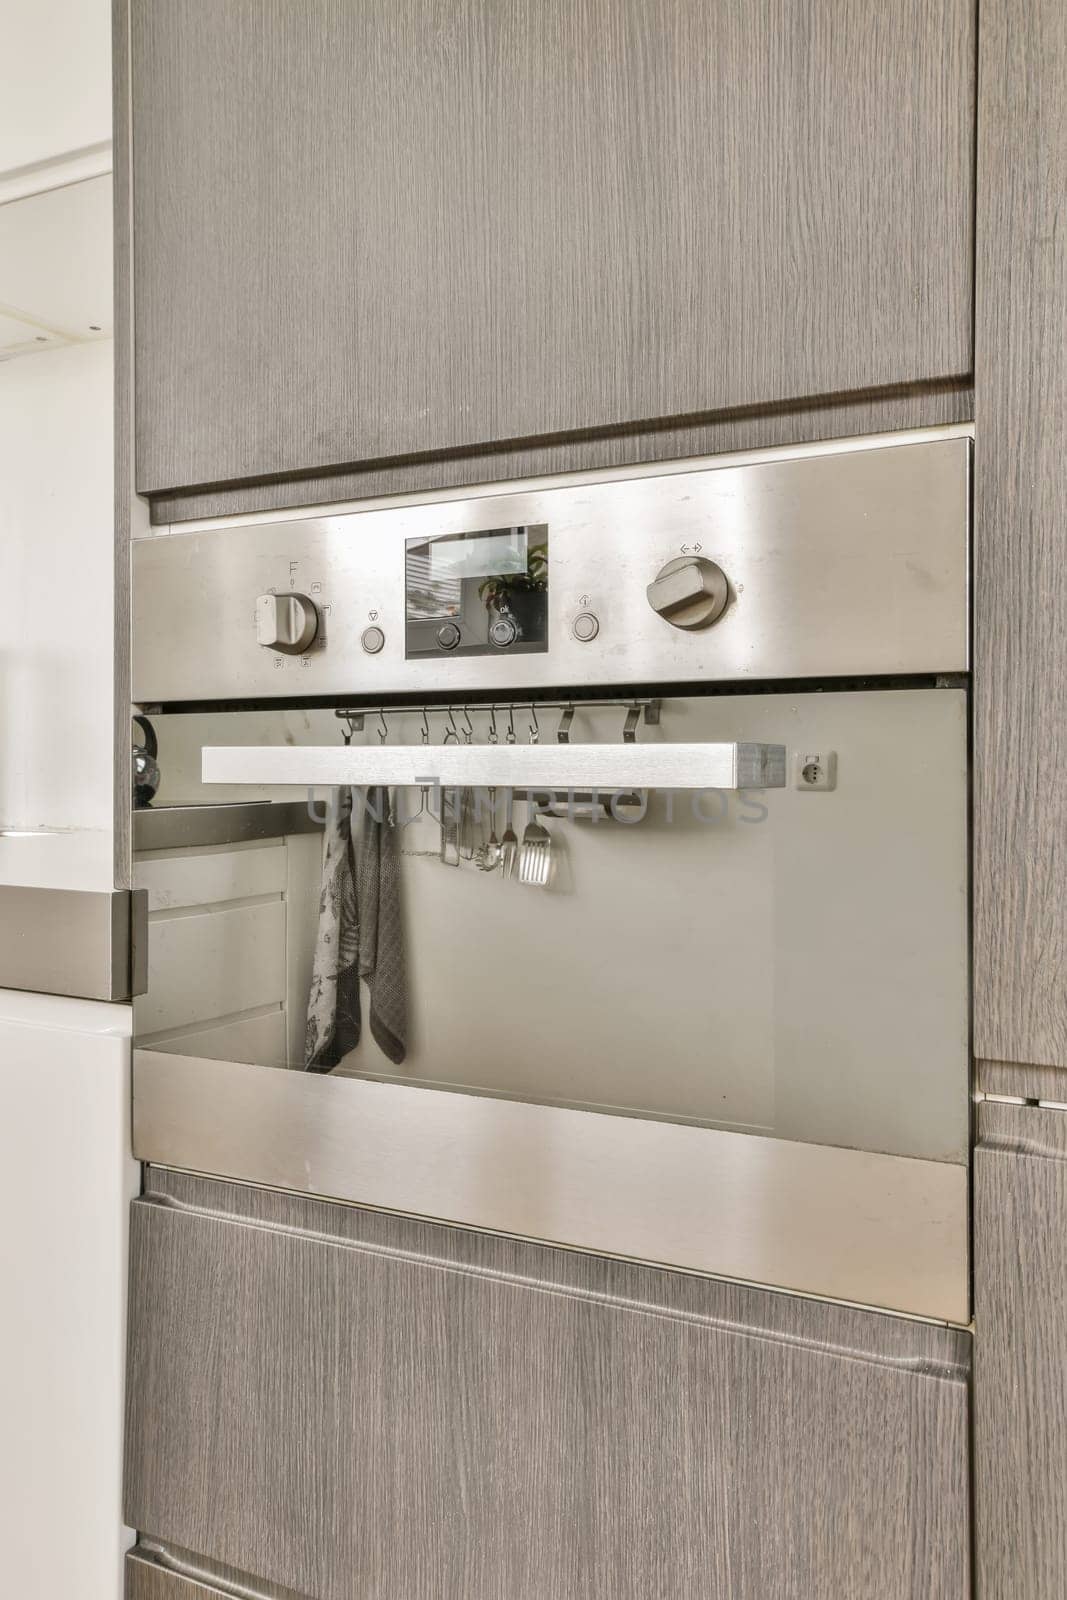 the stainless steel oven in the kitchen of a home by casamedia